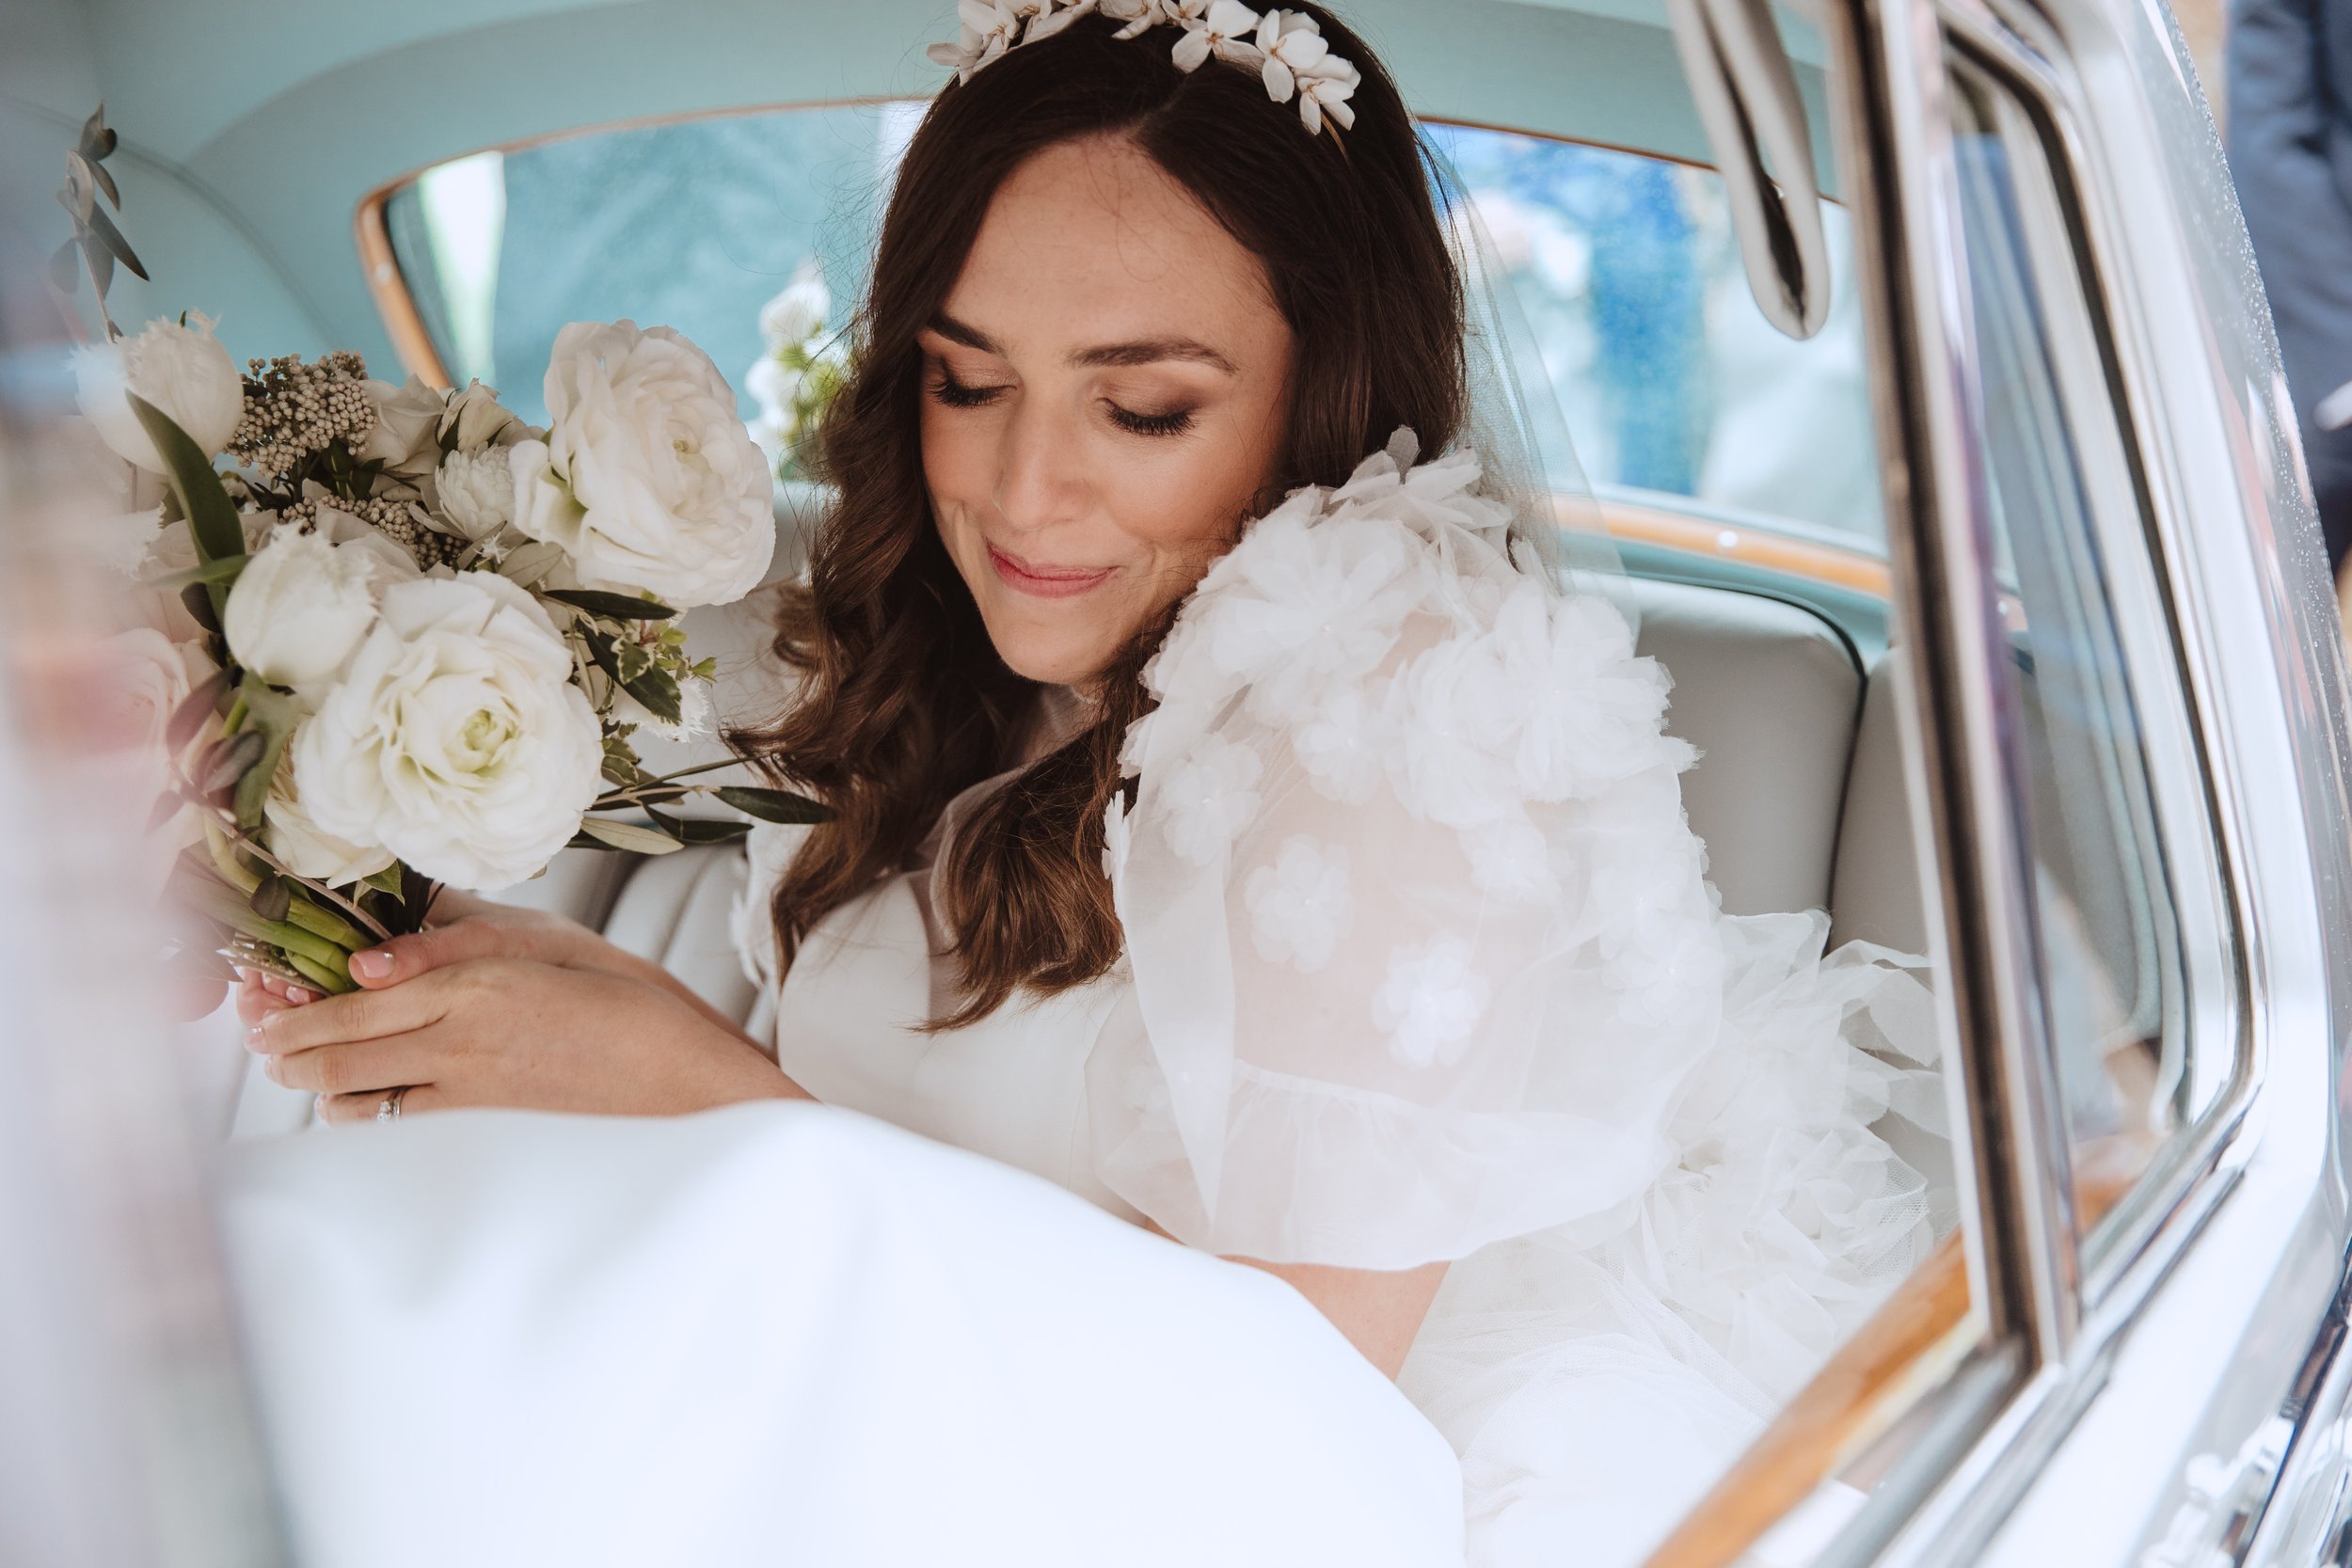 Beautiful bride Olivia wore a top and veil by Halfpenny London